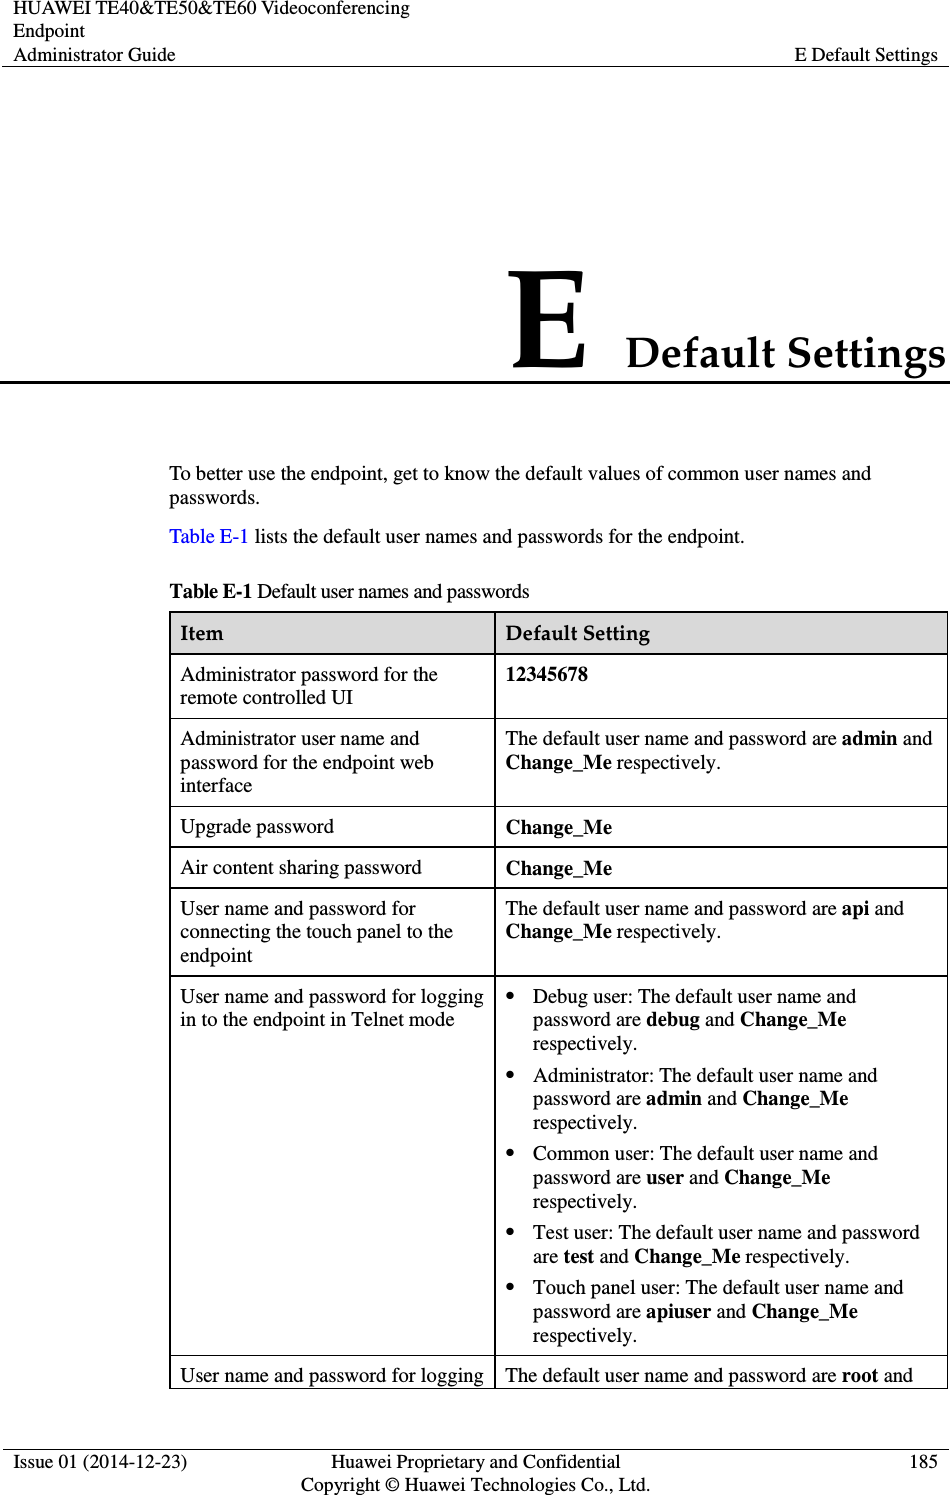 HUAWEI TE40&amp;TE50&amp;TE60 Videoconferencing Endpoint Administrator Guide  E Default Settings  Issue 01 (2014-12-23)  Huawei Proprietary and Confidential                                     Copyright © Huawei Technologies Co., Ltd. 185  E Default Settings To better use the endpoint, get to know the default values of common user names and passwords. Table E-1 lists the default user names and passwords for the endpoint. Table E-1 Default user names and passwords Item  Default Setting Administrator password for the remote controlled UI 12345678 Administrator user name and password for the endpoint web interface The default user name and password are admin and Change_Me respectively. Upgrade password  Change_Me Air content sharing password  Change_Me User name and password for connecting the touch panel to the endpoint The default user name and password are api and Change_Me respectively. User name and password for logging in to the endpoint in Telnet mode  Debug user: The default user name and password are debug and Change_Me respectively.  Administrator: The default user name and password are admin and Change_Me respectively.  Common user: The default user name and password are user and Change_Me respectively.  Test user: The default user name and password are test and Change_Me respectively.  Touch panel user: The default user name and password are apiuser and Change_Me respectively. User name and password for logging  The default user name and password are root and 